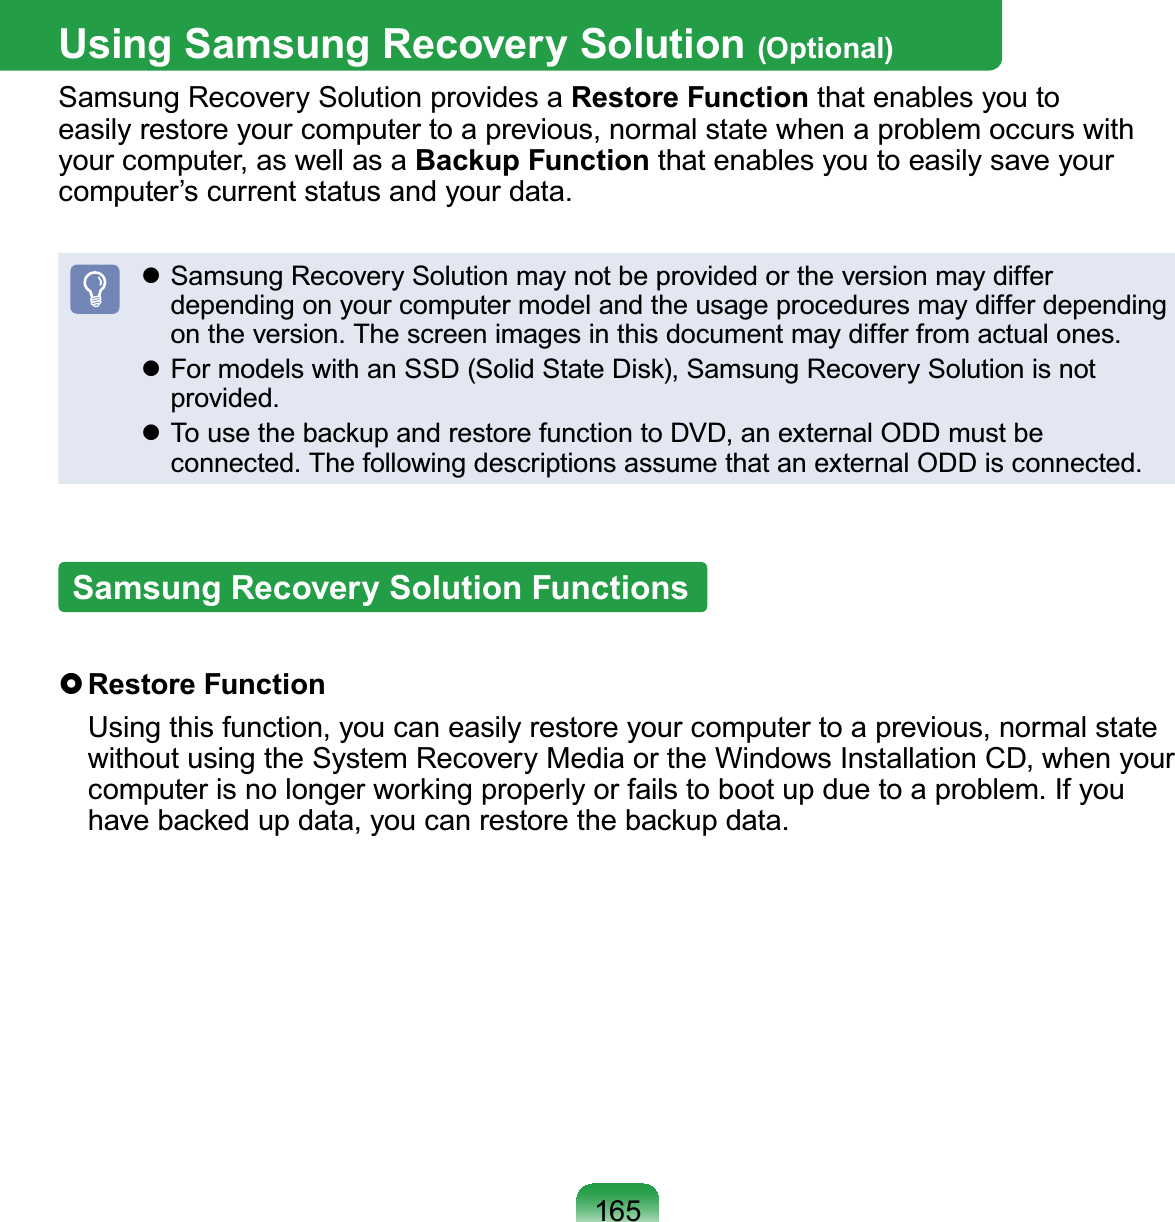 165Using Samsung Recovery Solution (Optional)SamsungRecoverySolutionprovidesaRestore Function that enables you toeasily restore your computer to a previous, normal state when a problem occurs withyour computer, as well as a Backup Function that enables you to easily save yourcomputer’scurrentstatusandyourdata.z Samsung Recovery Solution may not be provided or the version may differdependingonyourcomputermodelandtheusageproceduresmaydifferdependingontheversion.Thescreenimagesinthisdocumentmaydifferfromactualones.z)RUPRGHOVZLWKDQ66&apos;6ROLG6WDWH&apos;LVN6DPVXQJ5HFRYHU\6ROXWLRQLVQRWprovided.z7RXVHWKHEDFNXSDQGUHVWRUHIXQFWLRQWR&apos;9&apos;DQH[WHUQDO2&apos;&apos;PXVWEHconnected. The following descriptions assume that an external ODD is connected.Samsung Recovery Solution Functions}Restore Function Using this function, you can easily restore your computer to a previous, normal statewithoutusingtheSystemRecoveryMediaortheWindowsInstallationCD,whenyourFRPSXWHULVQRORQJHUZRUNLQJSURSHUO\RUIDLOVWRERRWXSGXHWRDSUREOHP,I\RXKDYHEDFNHGXSGDWD\RXFDQUHVWRUHWKHEDFNXSGDWD